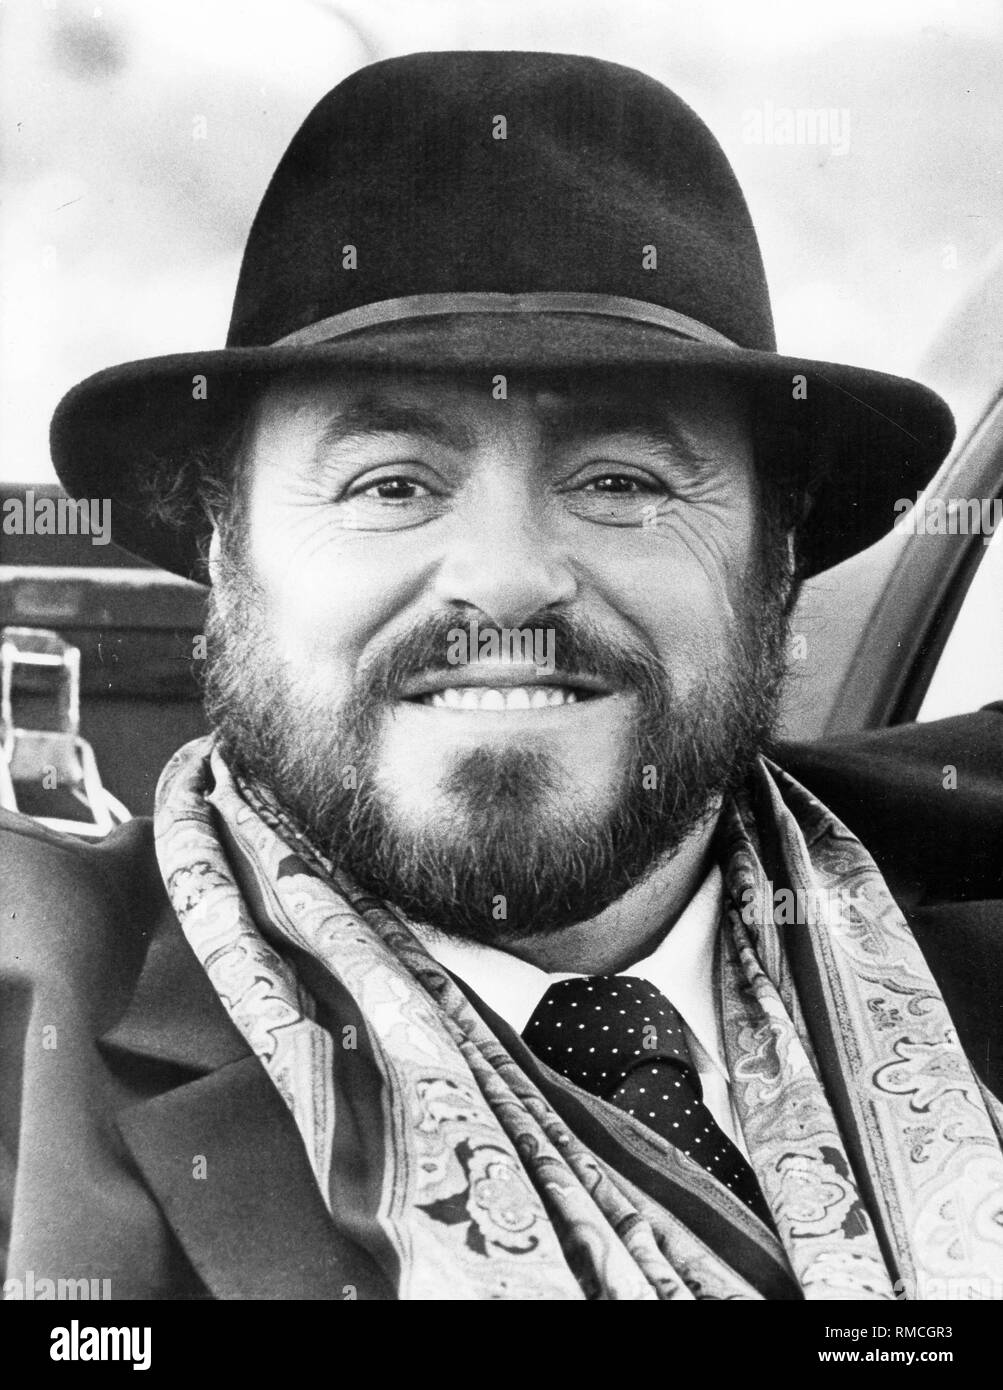 Luciano Pavarotti, an Italian opera singer, with scarf and hat. Stock Photo